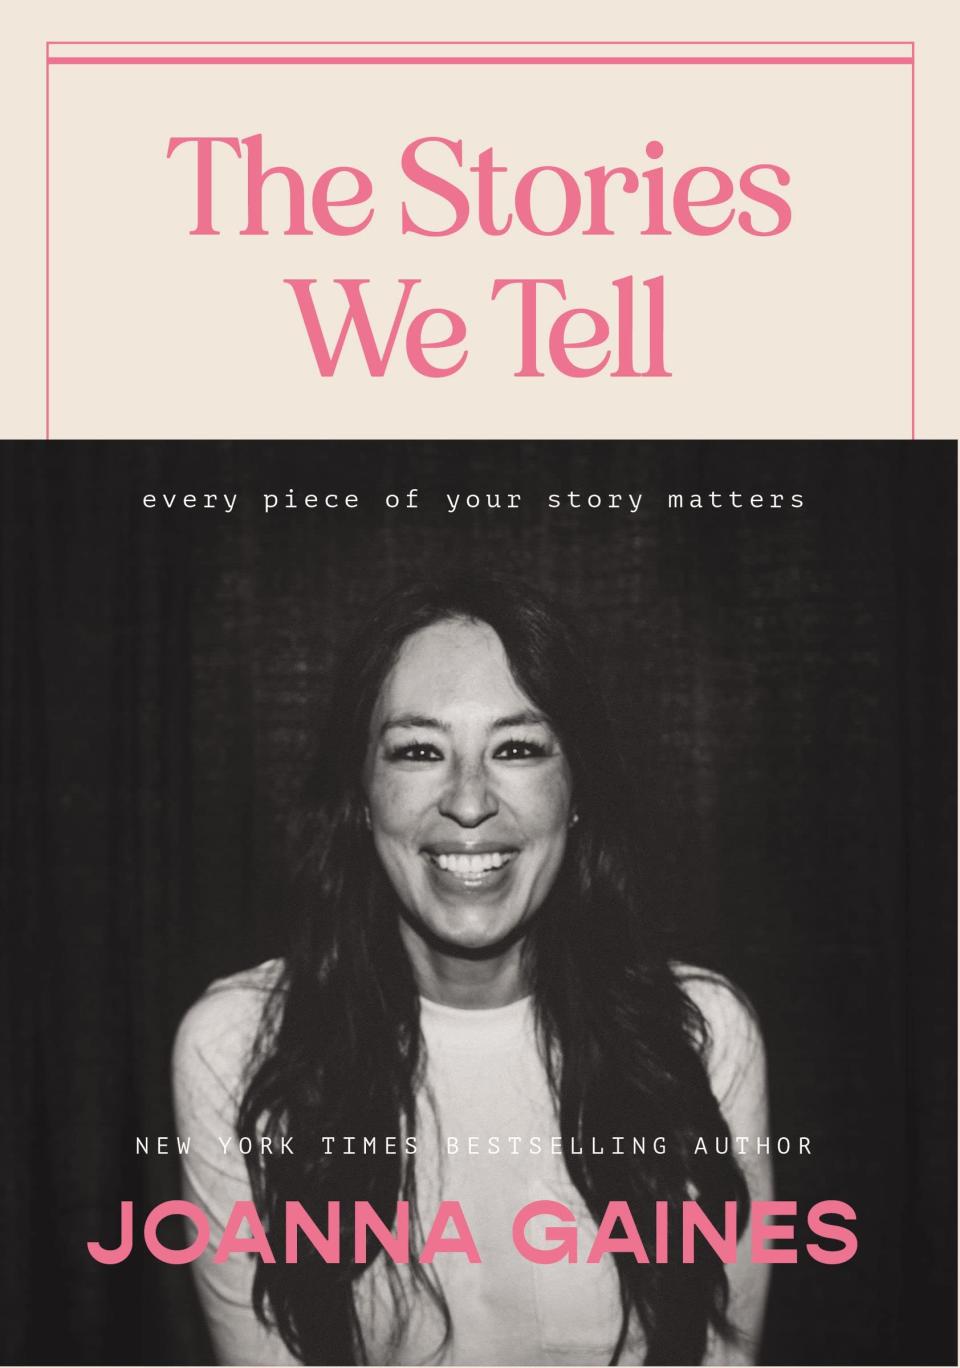 "The Stories We Tell: Every Piece of Your Story Matters," by Joanna Gaines.